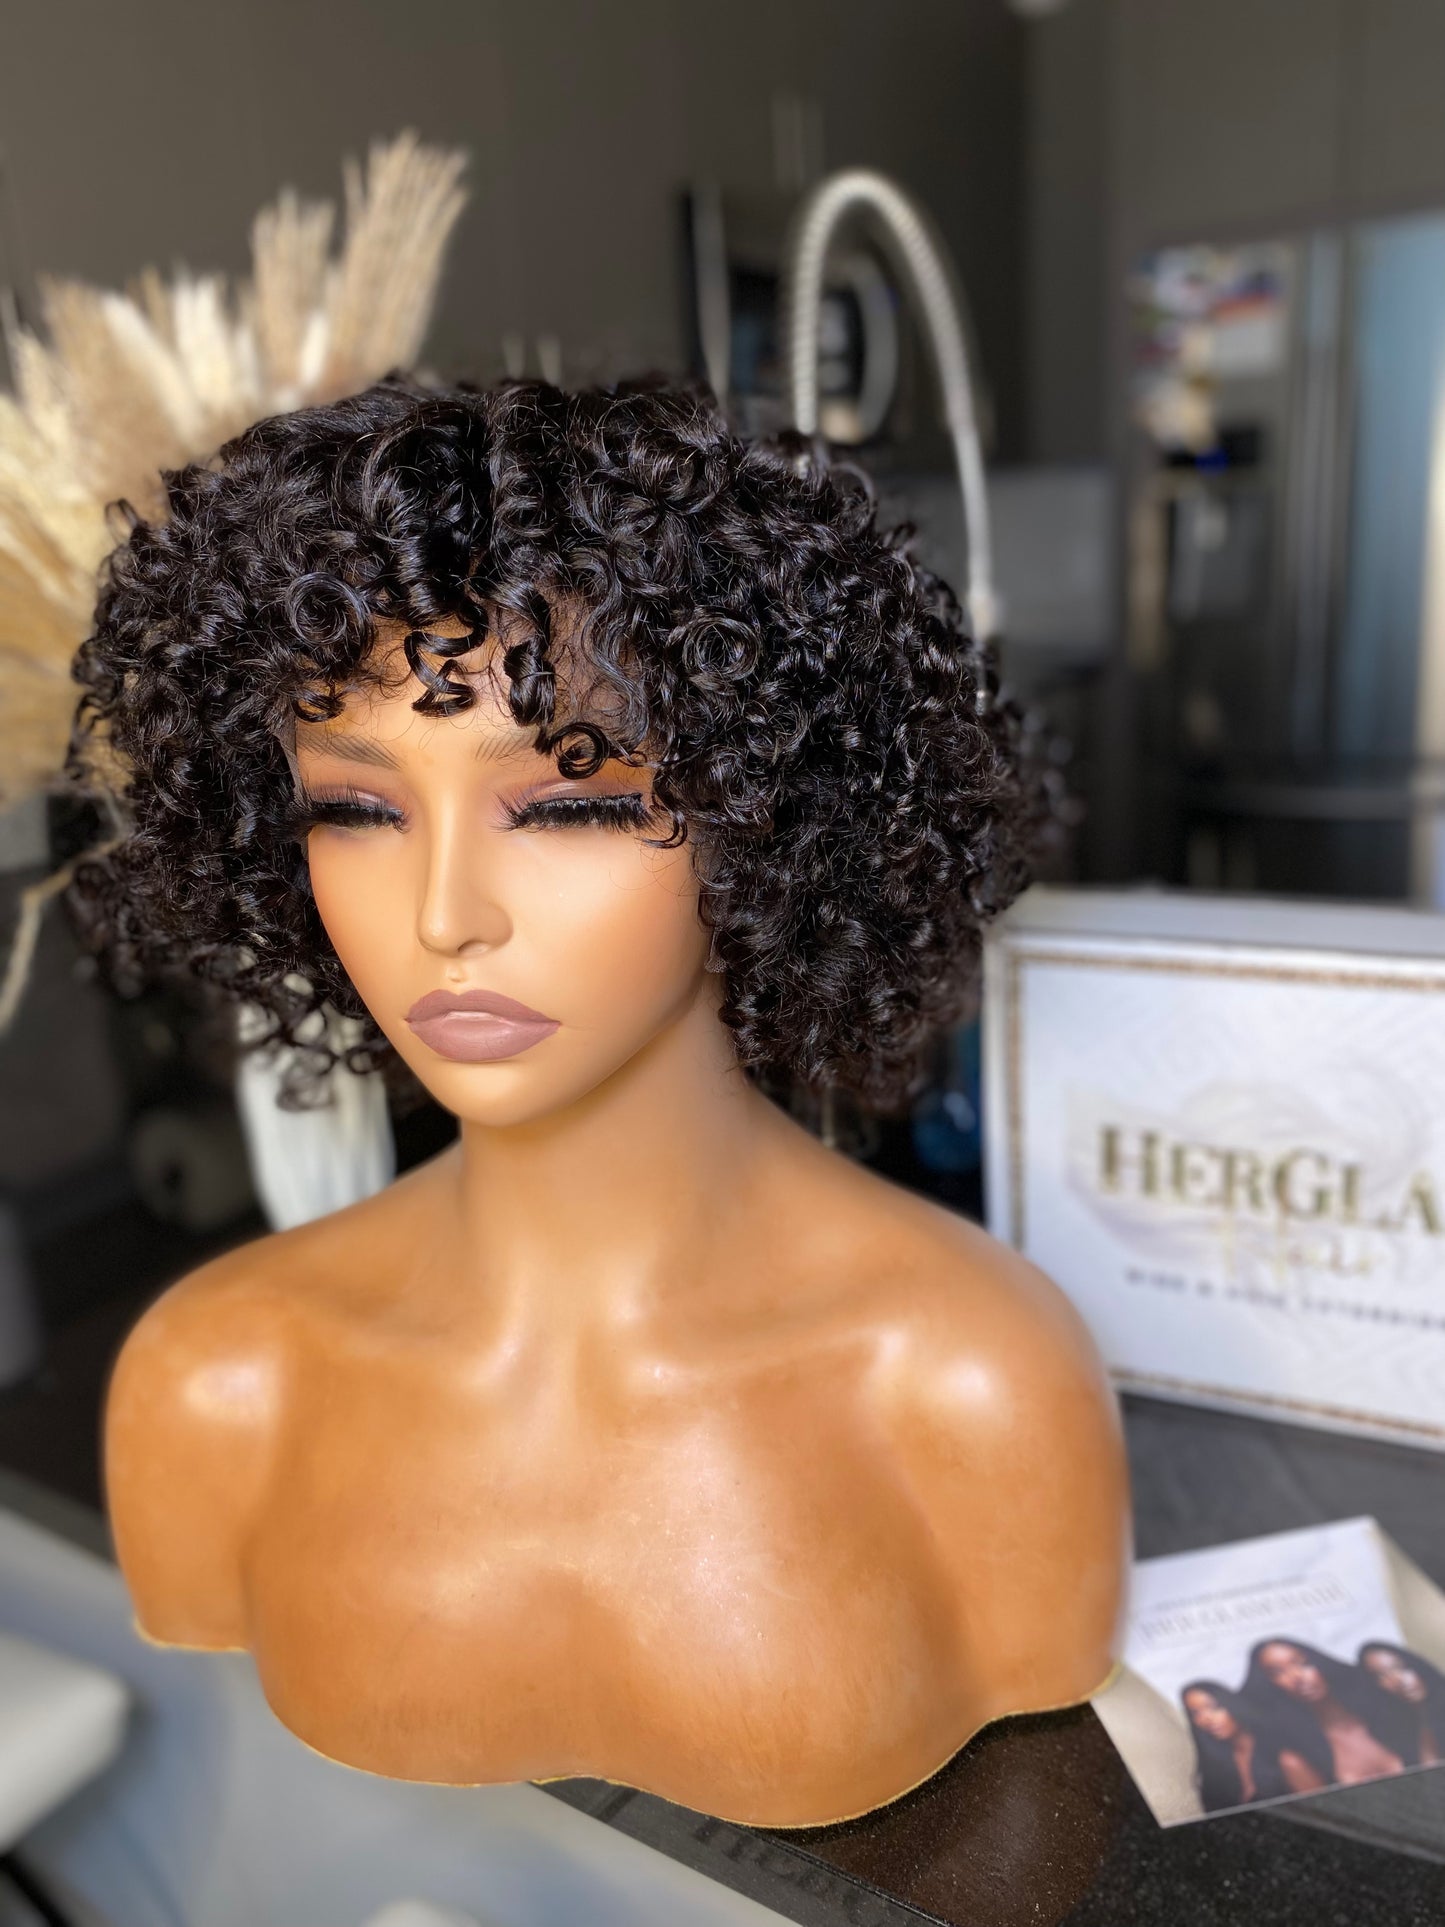 "Kerry" lace wig